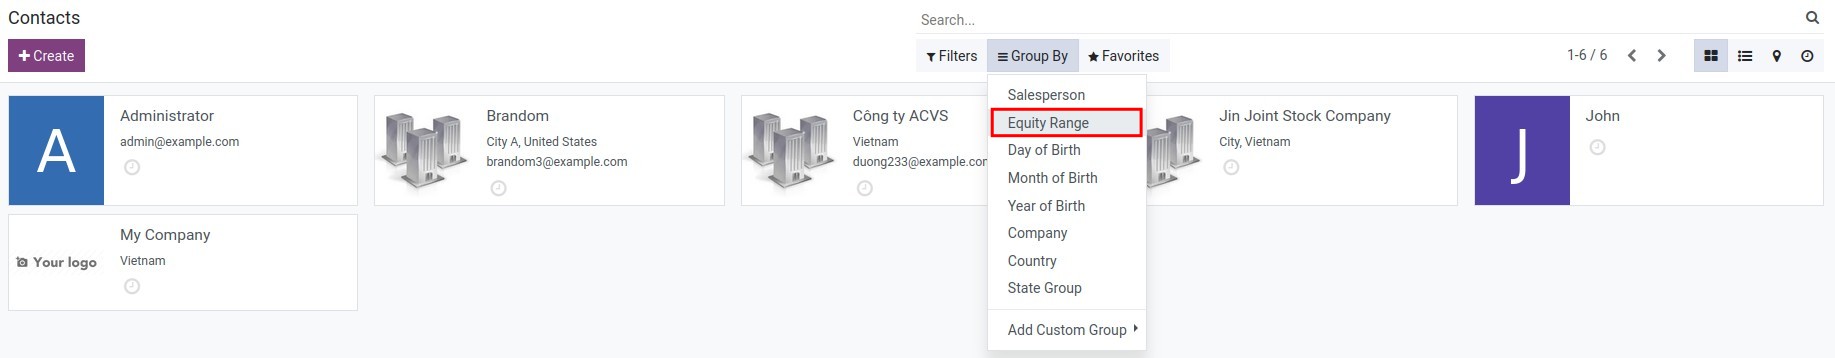 Use filter/group to search for partners by Equity range